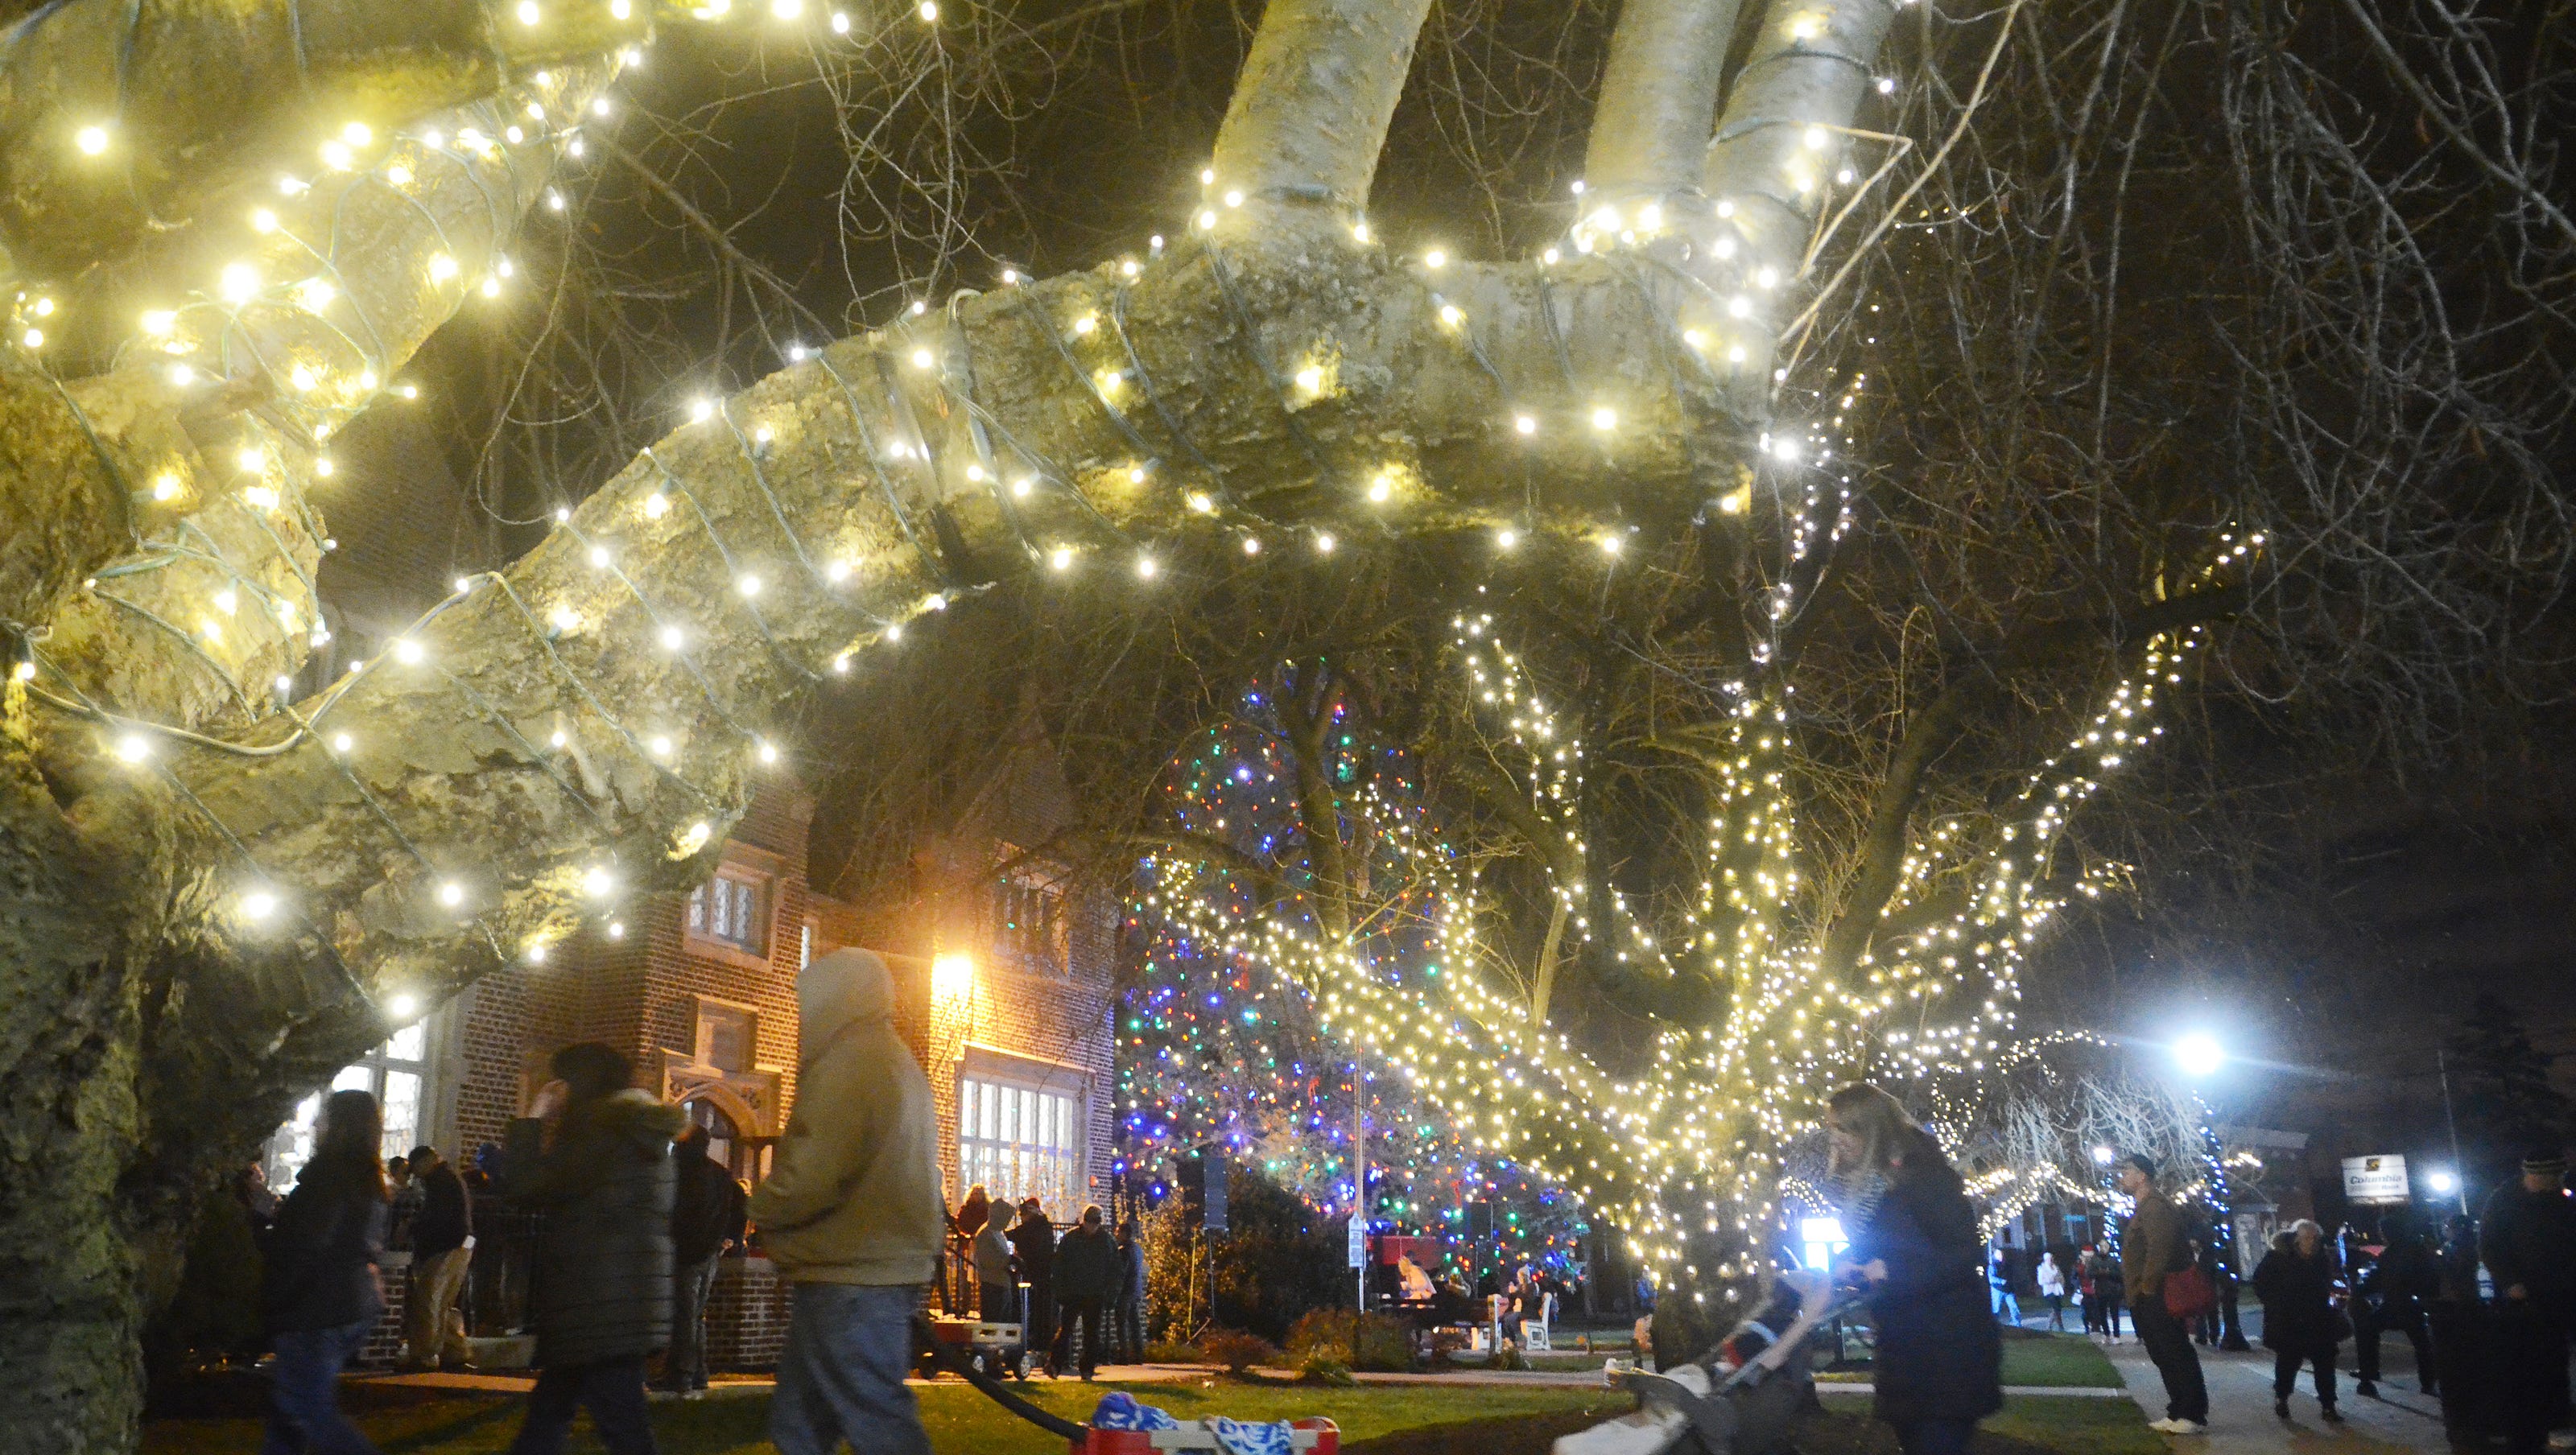 Oldfashioned Holiday Stroll event planned for Pompton Lakes